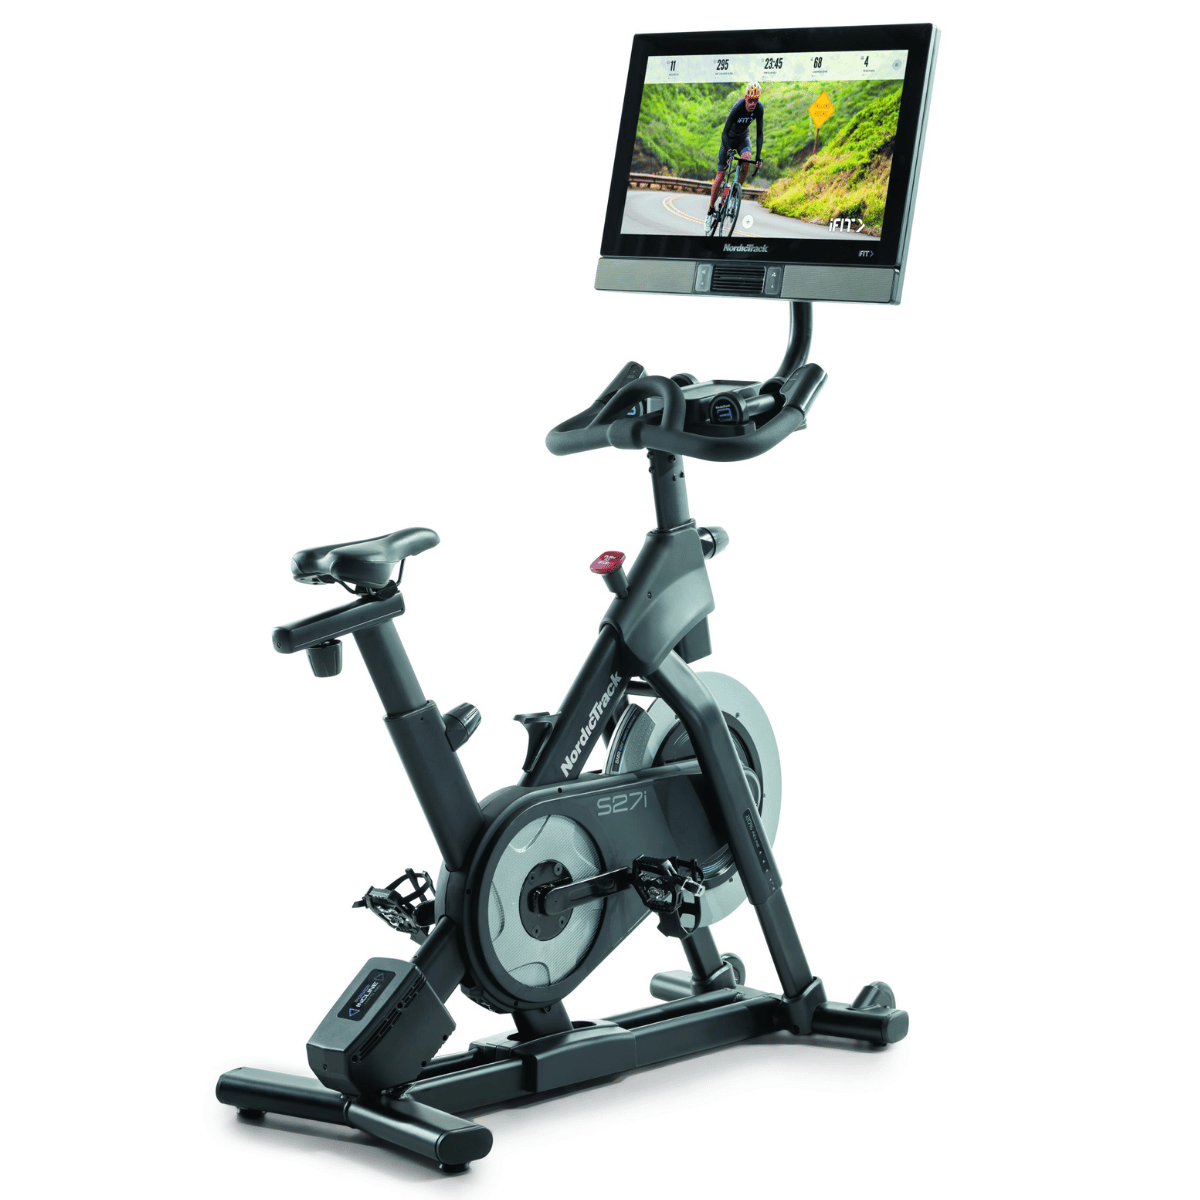 NordicTrack S27i Studio Cycle * Clearance